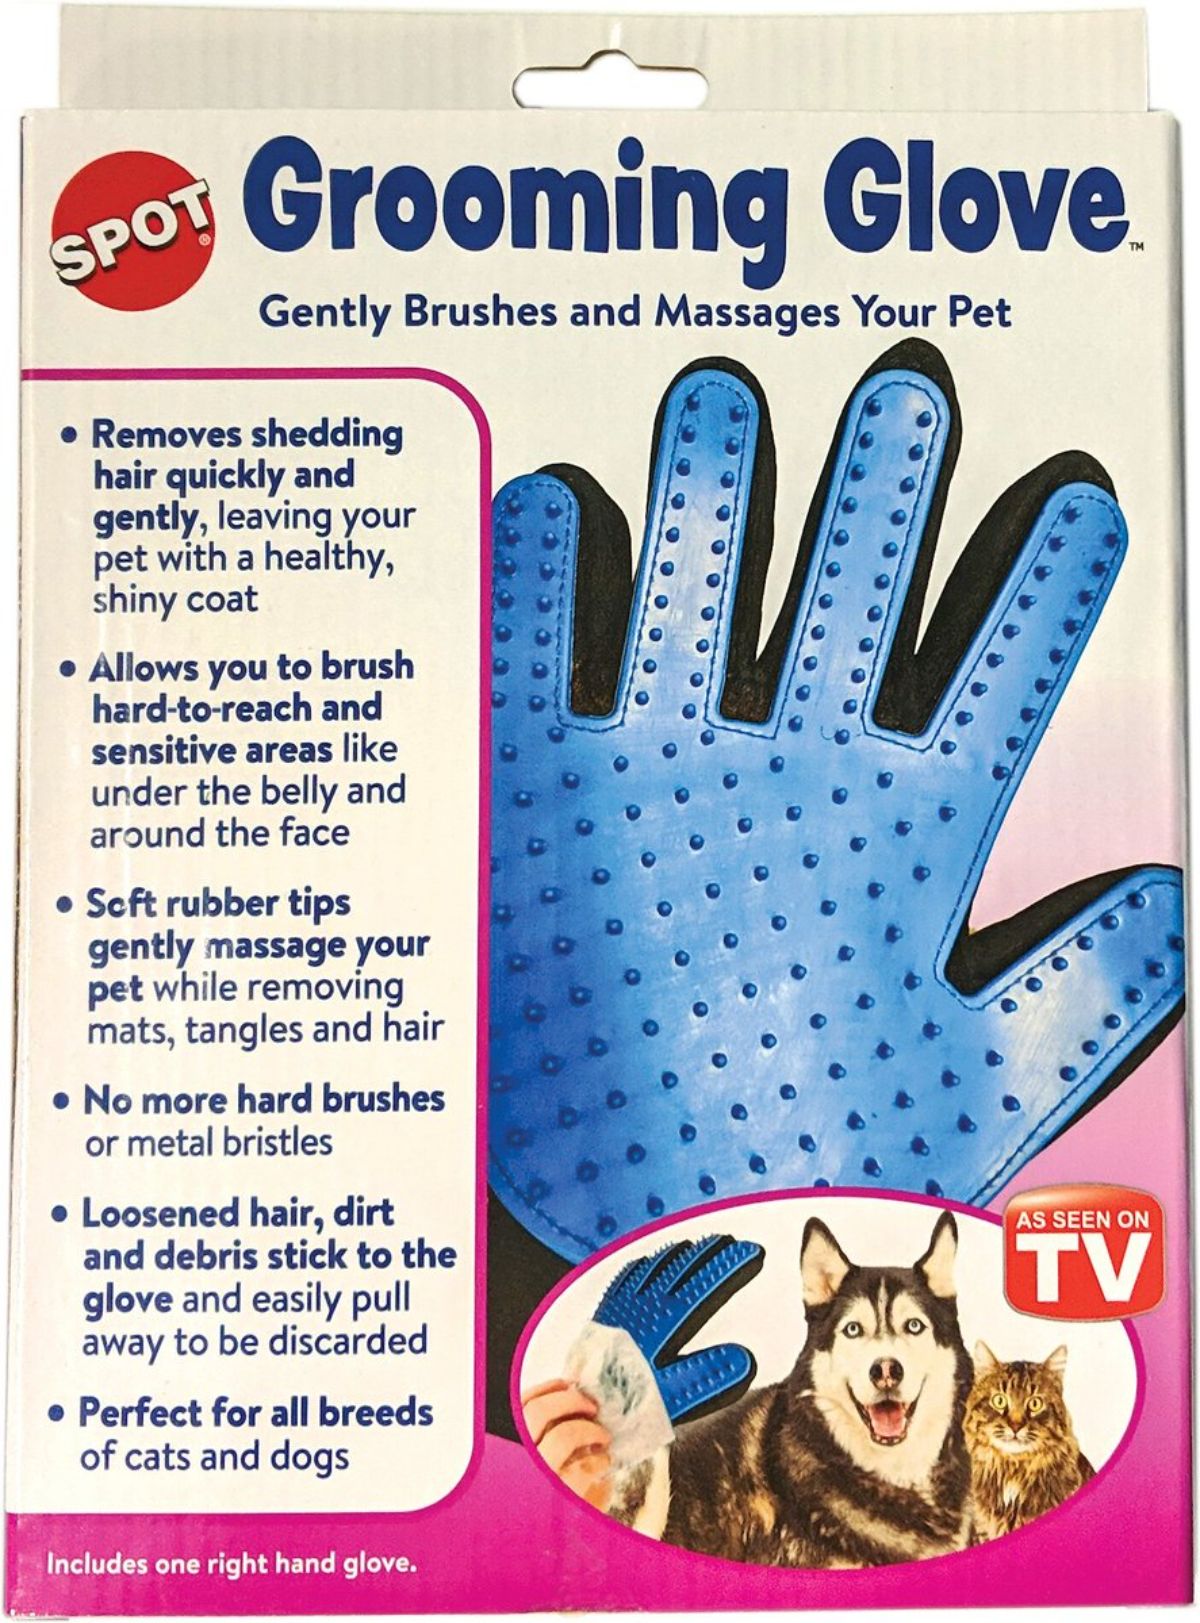 Ethical Pet 9-in Spot Grooming Glove